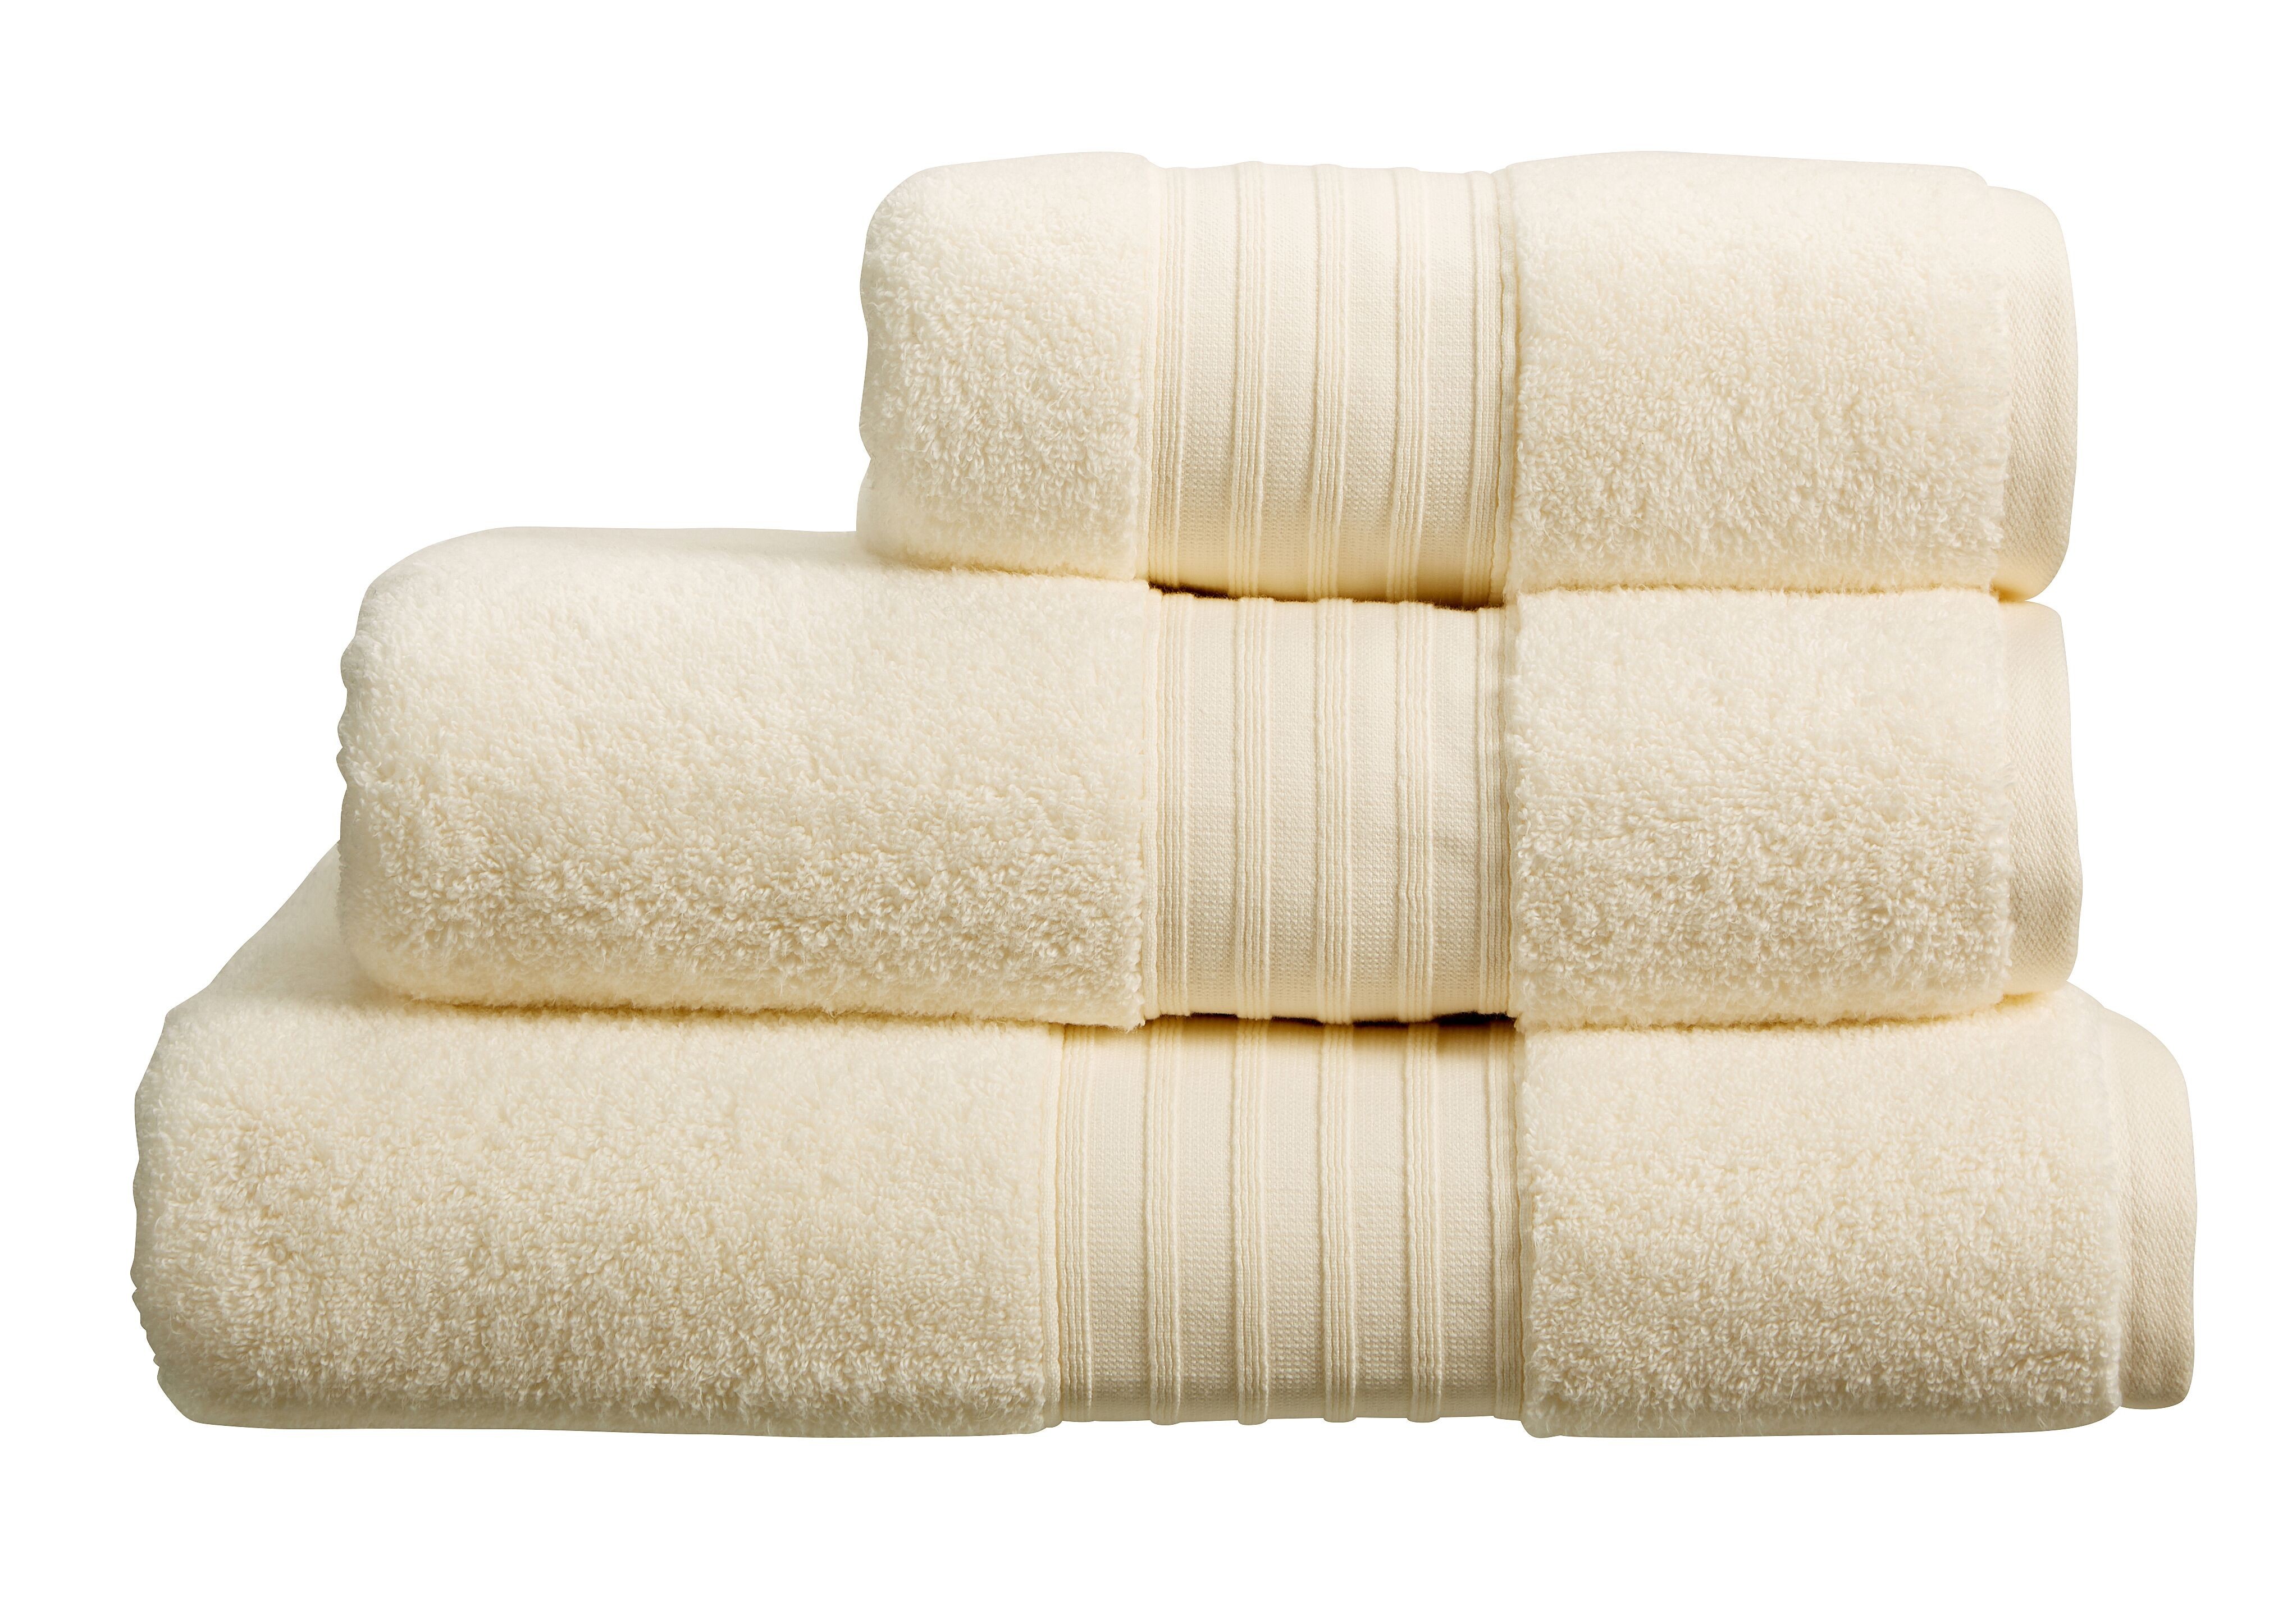 Pack of 3 Optimum Bath Sheets (Available in 4 Colours)